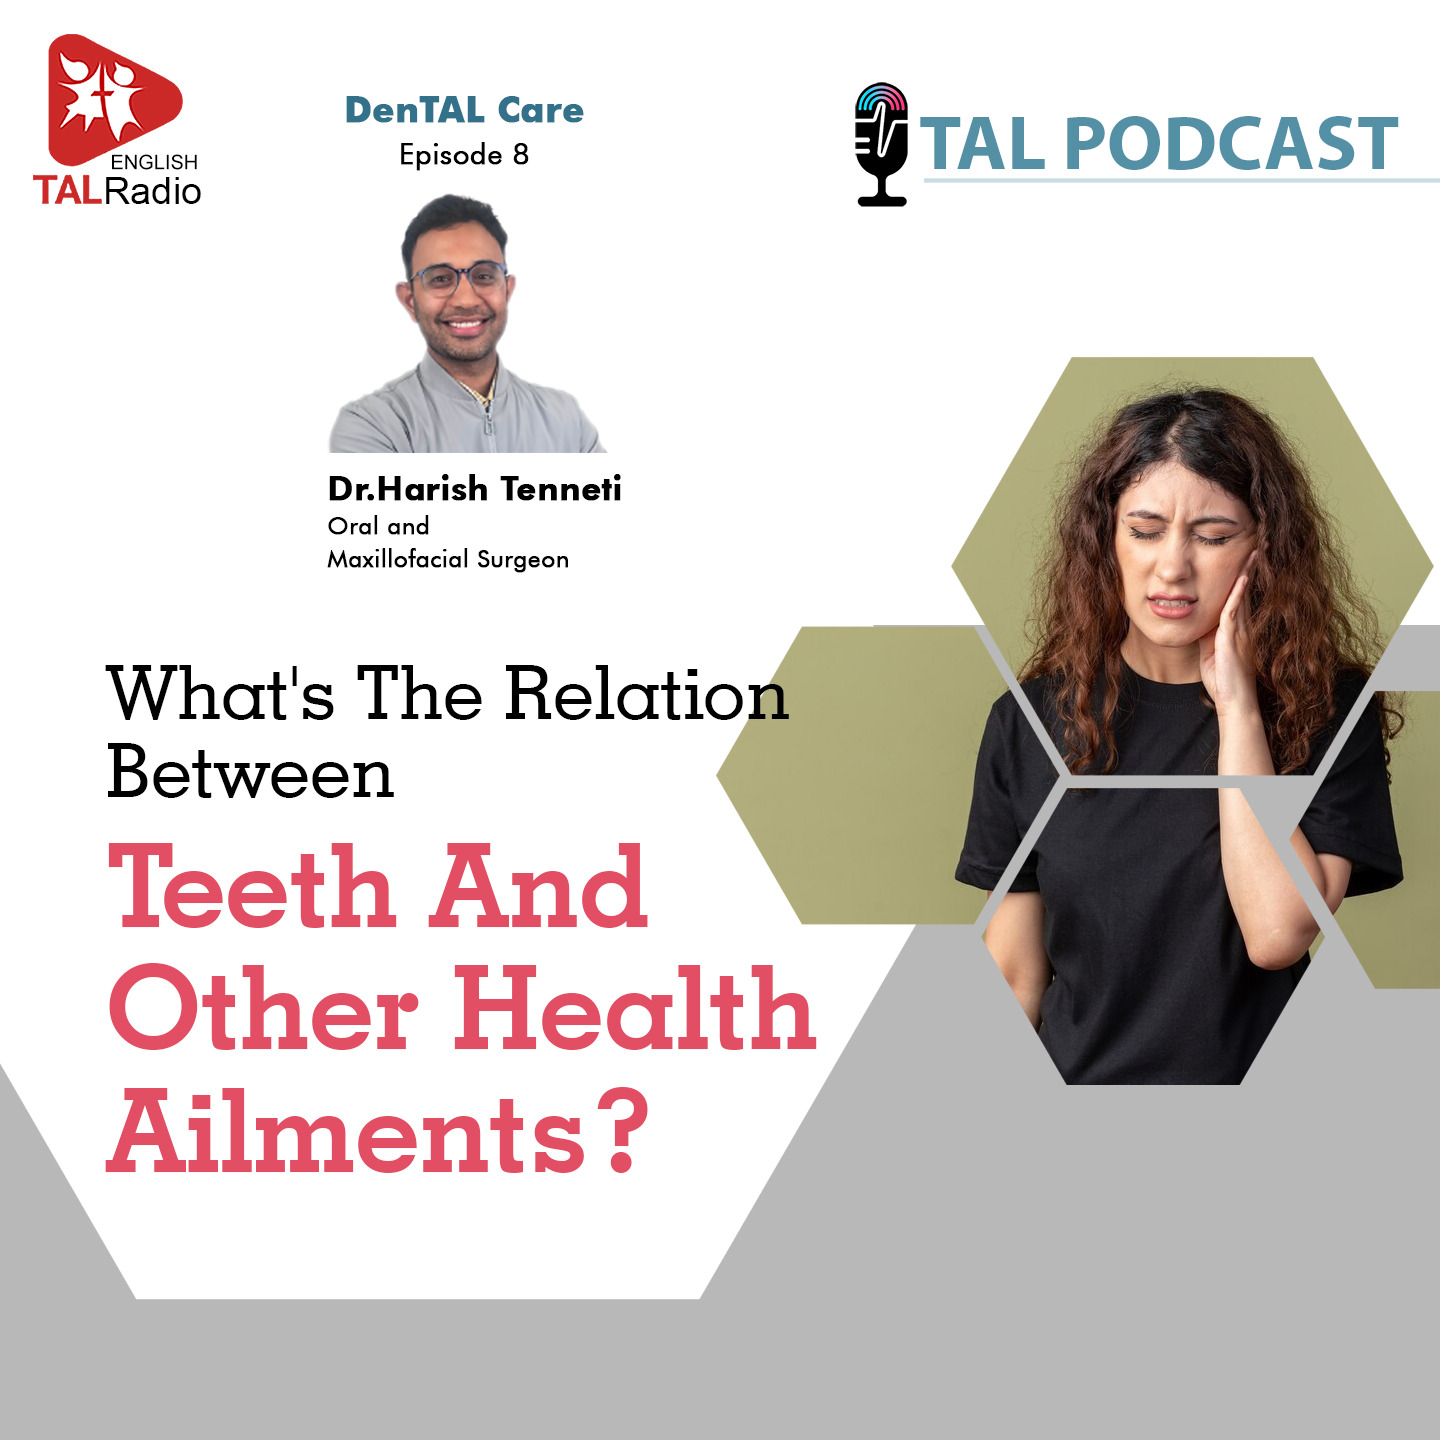 What's The Relation Between Teeth And Other Health Ailments? | DenTAL Care - 8